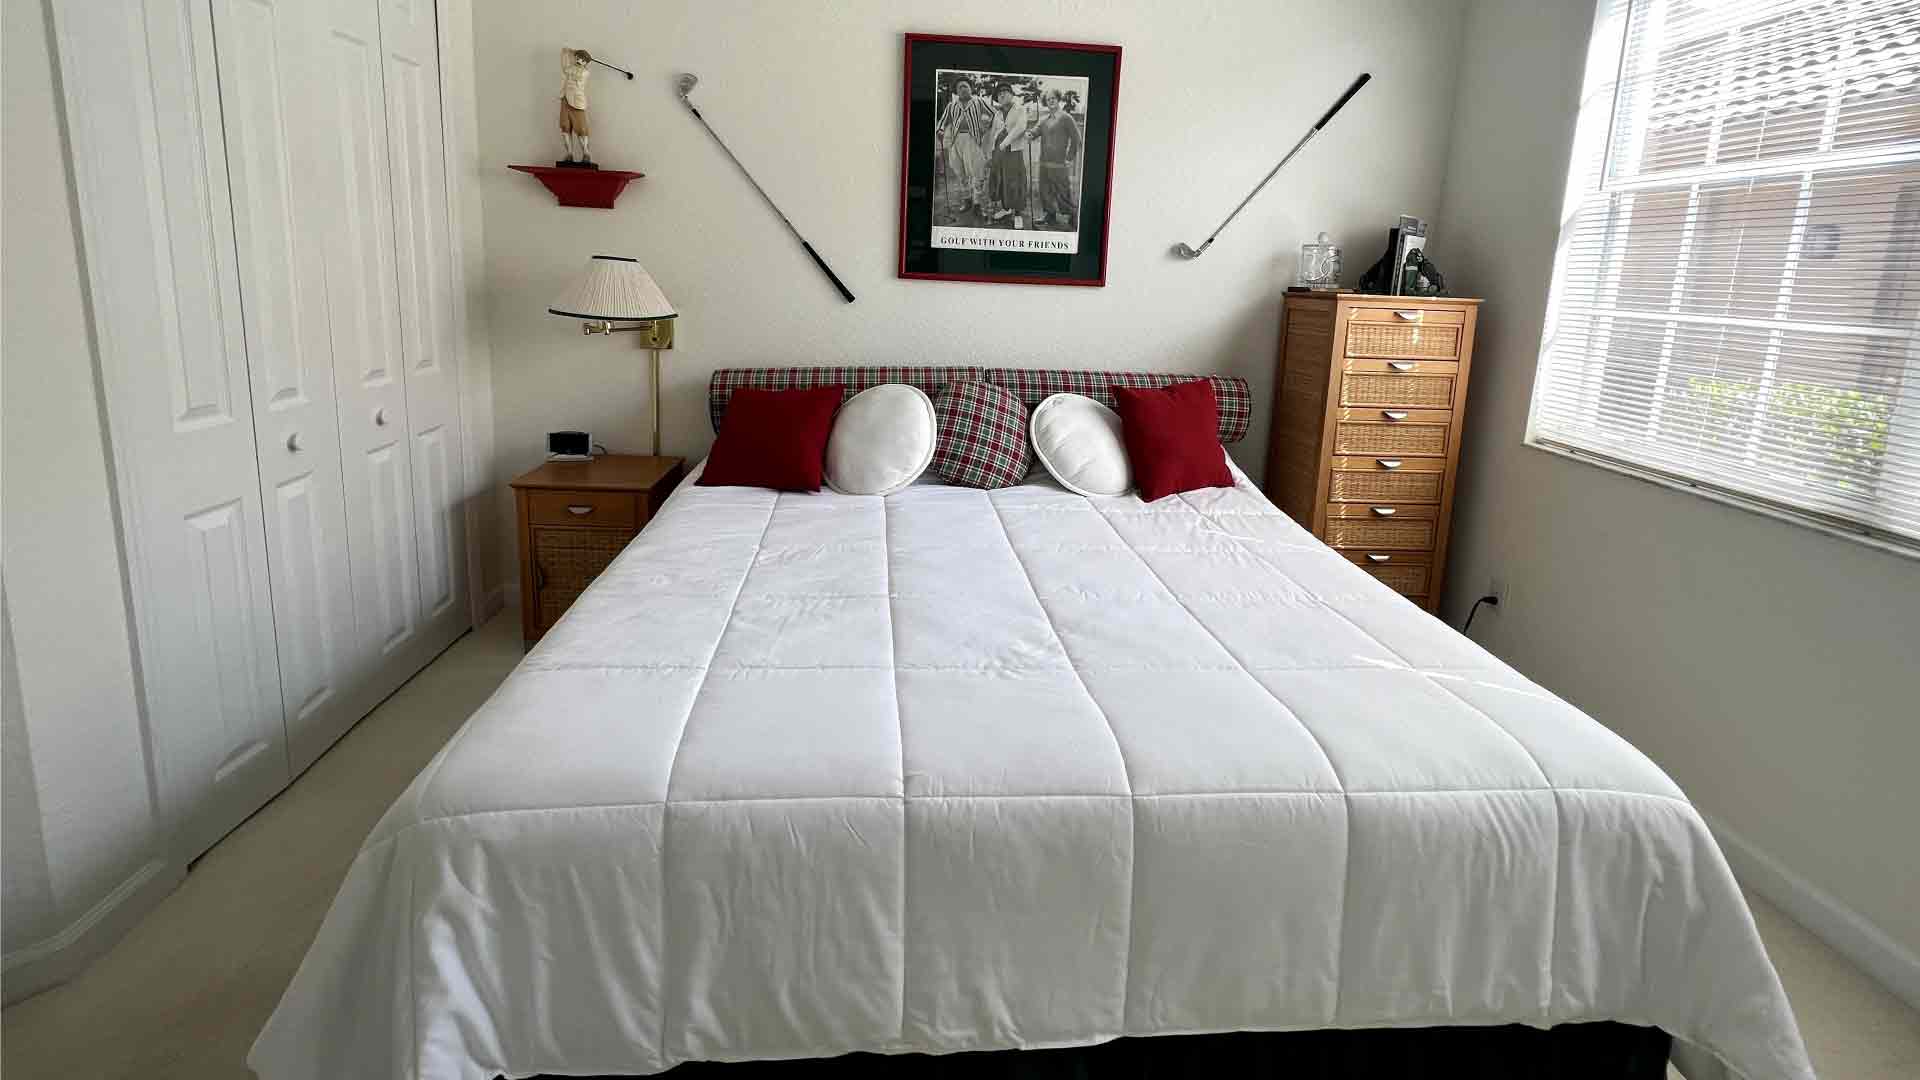 Bedroom - Regular cleaning in Cape Coral by Goldmillio - Apr 18